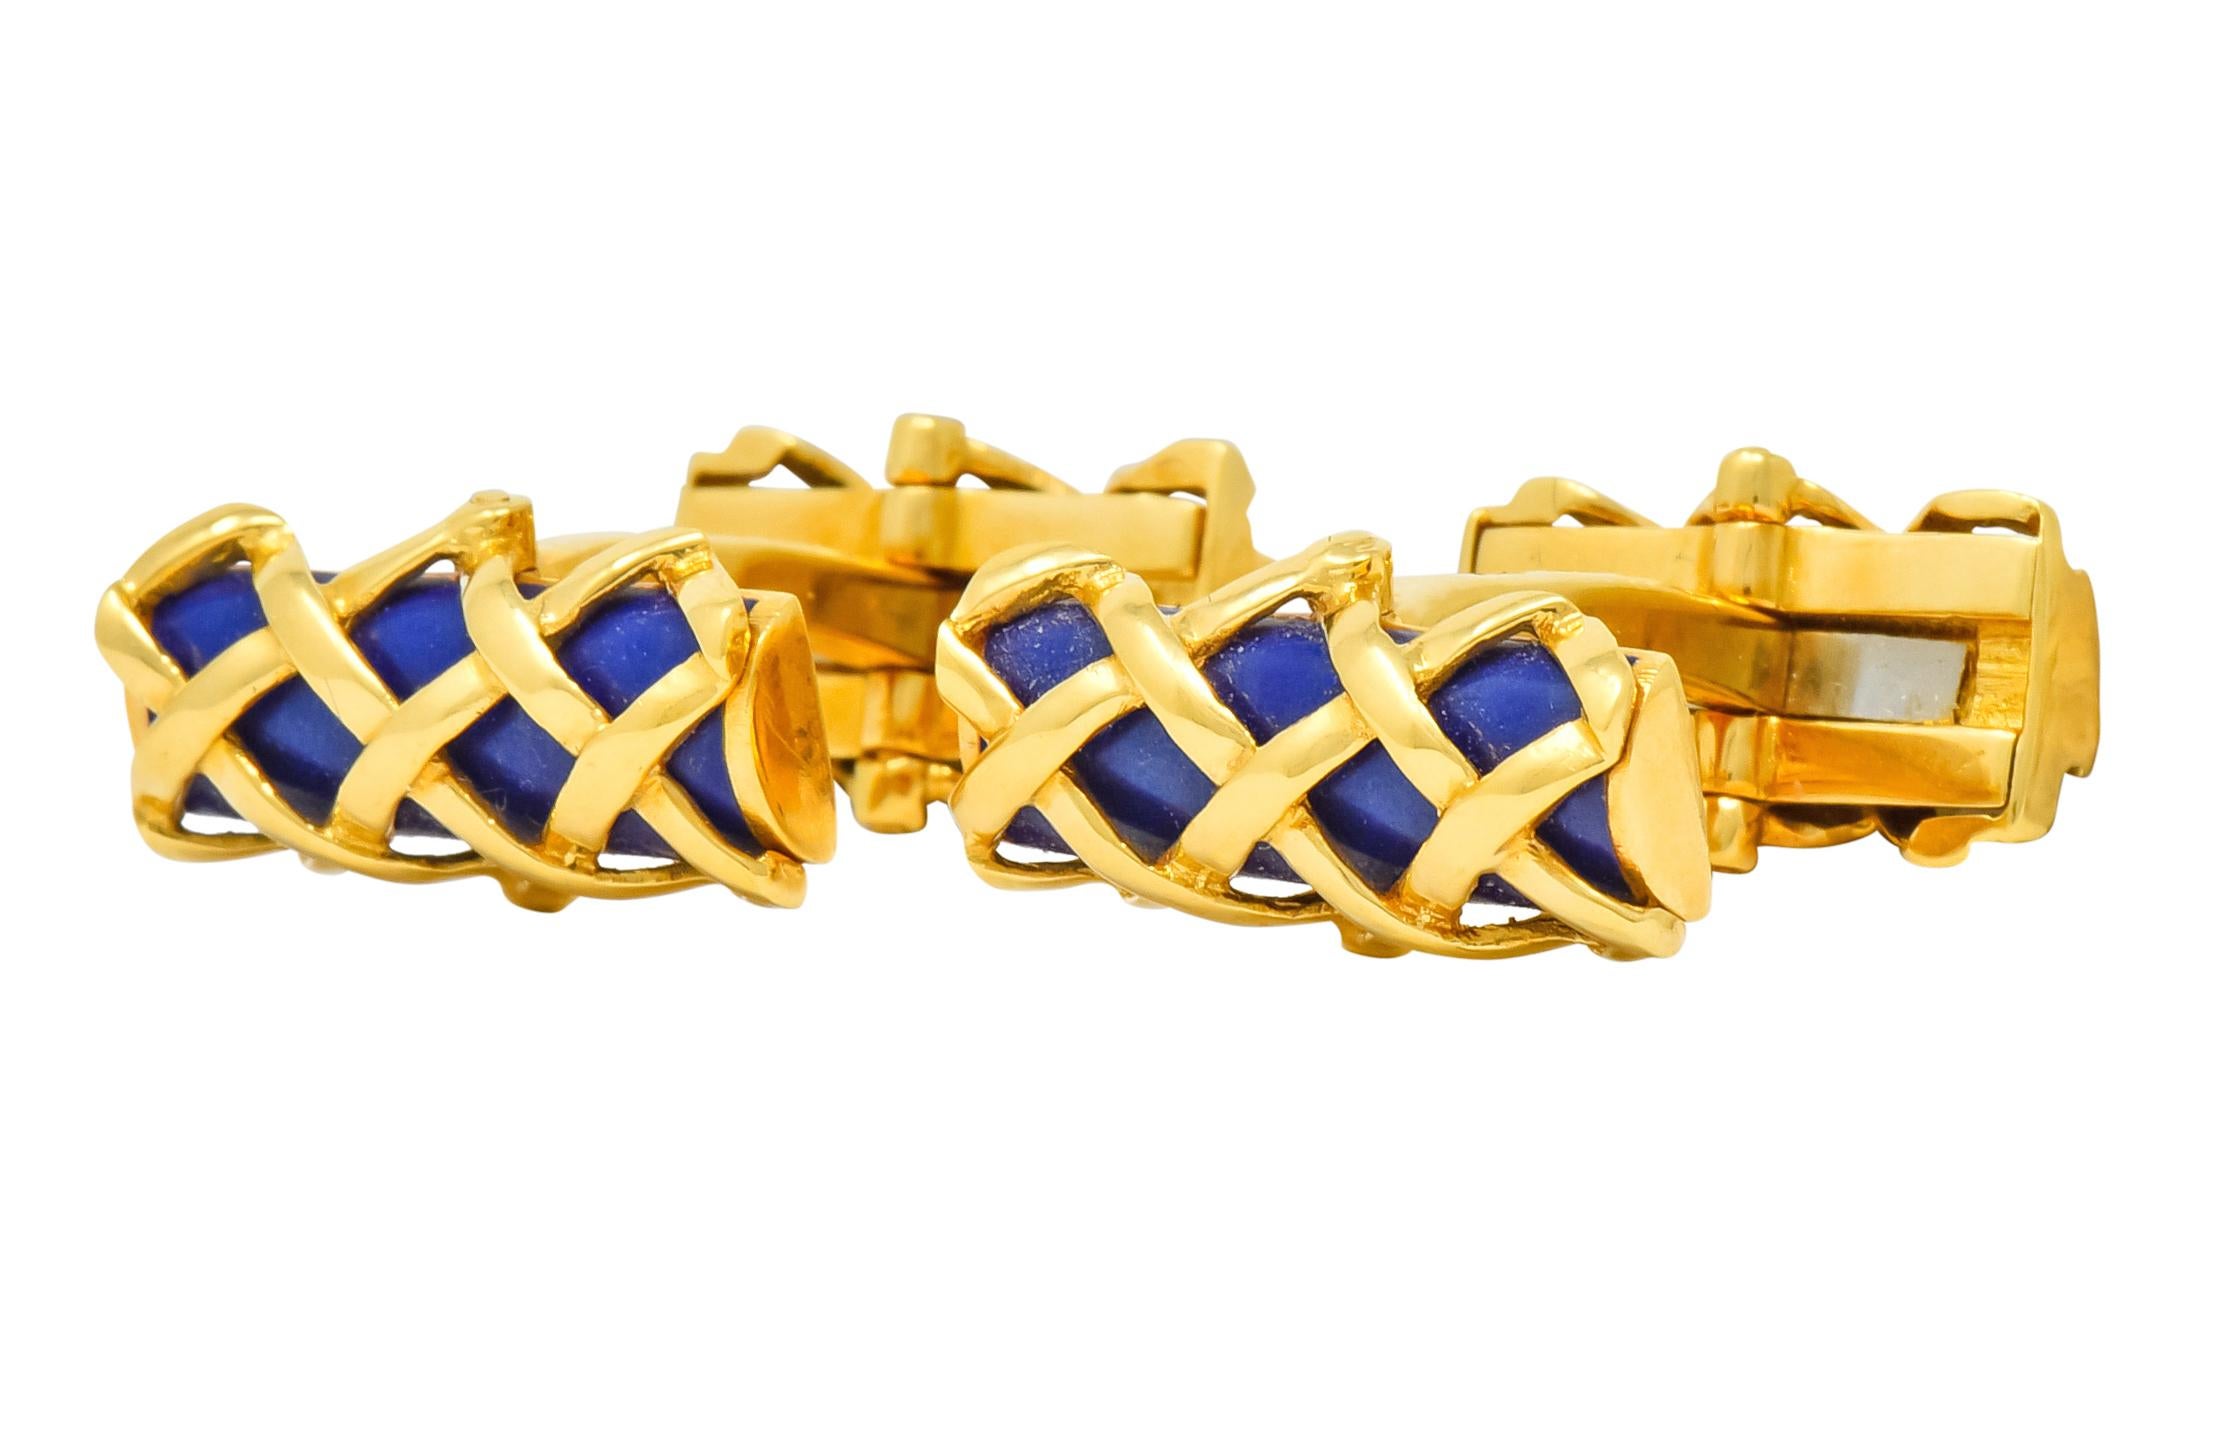 Lever style cufflinks terminating as two rectangular lattice cages with a high polished gold finish

Each contains a rounded bar of bright ultramarine blue enamel with no loss

Fully signed Tiffany & Co.

Stamped 750 for 18 karat gold

Circa